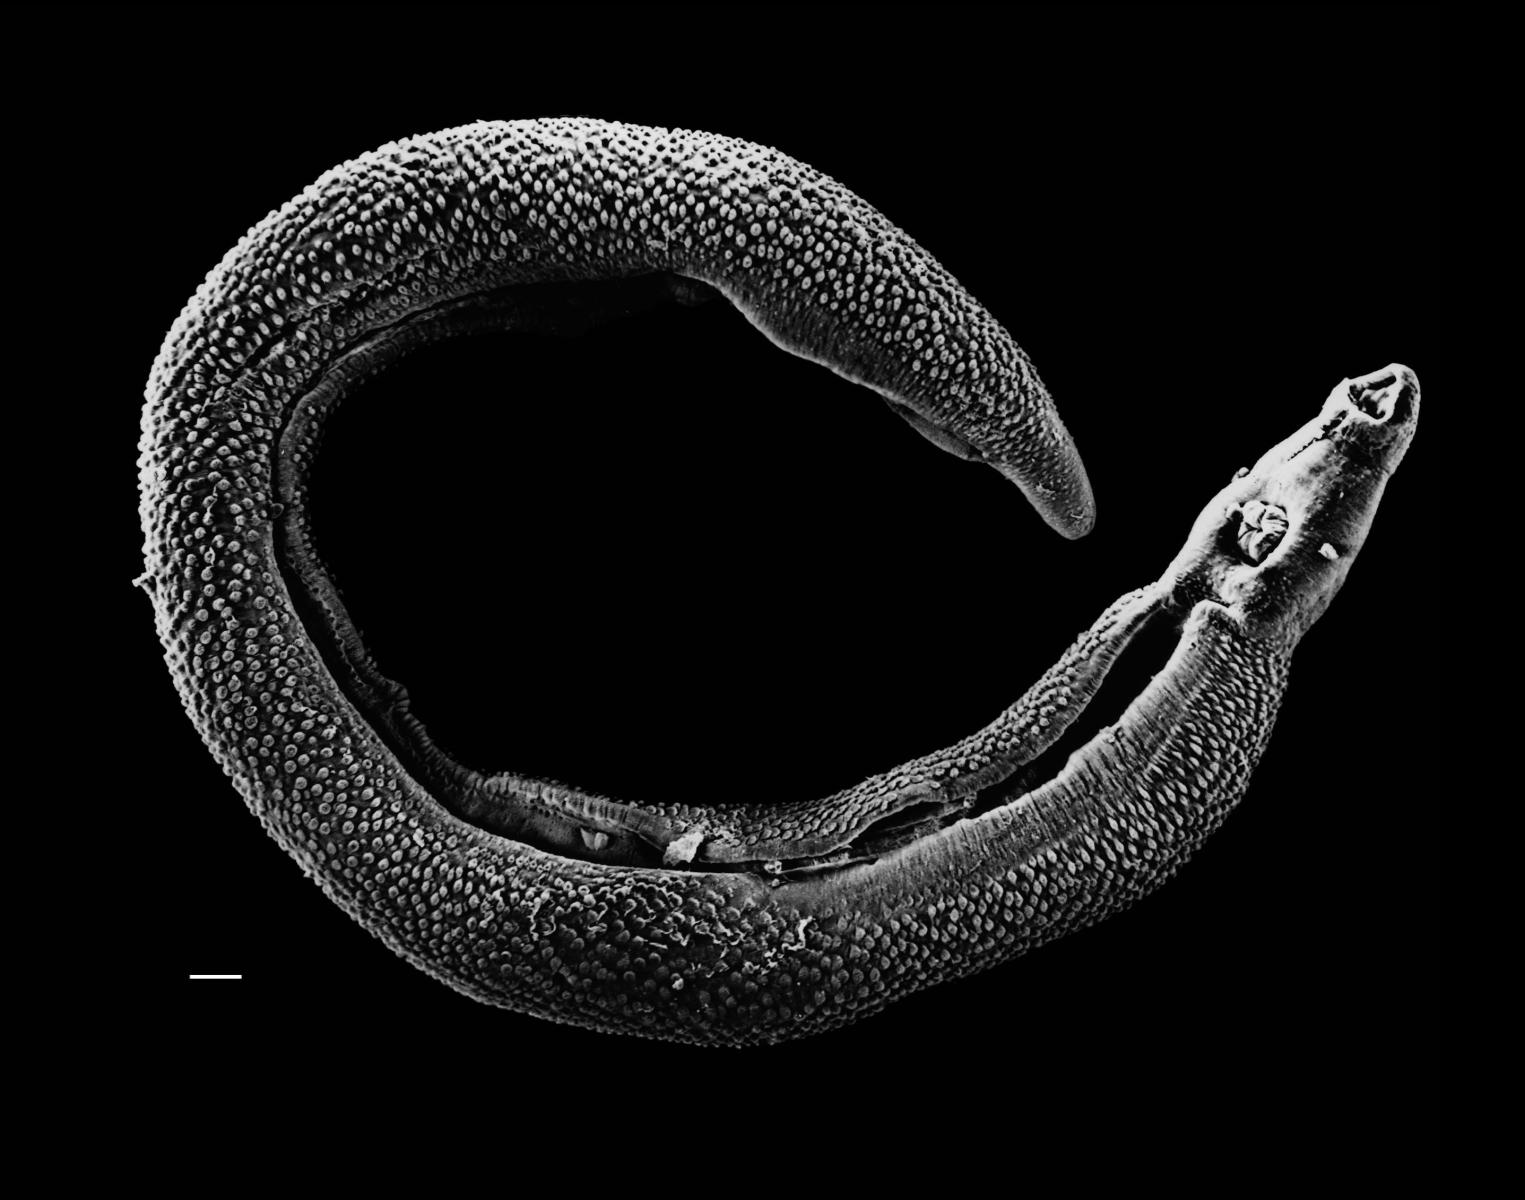 Electron micrograph of an adult male Schistosoma parasite worm. The bar (bottom left) represents a magnification of 0.5mm.